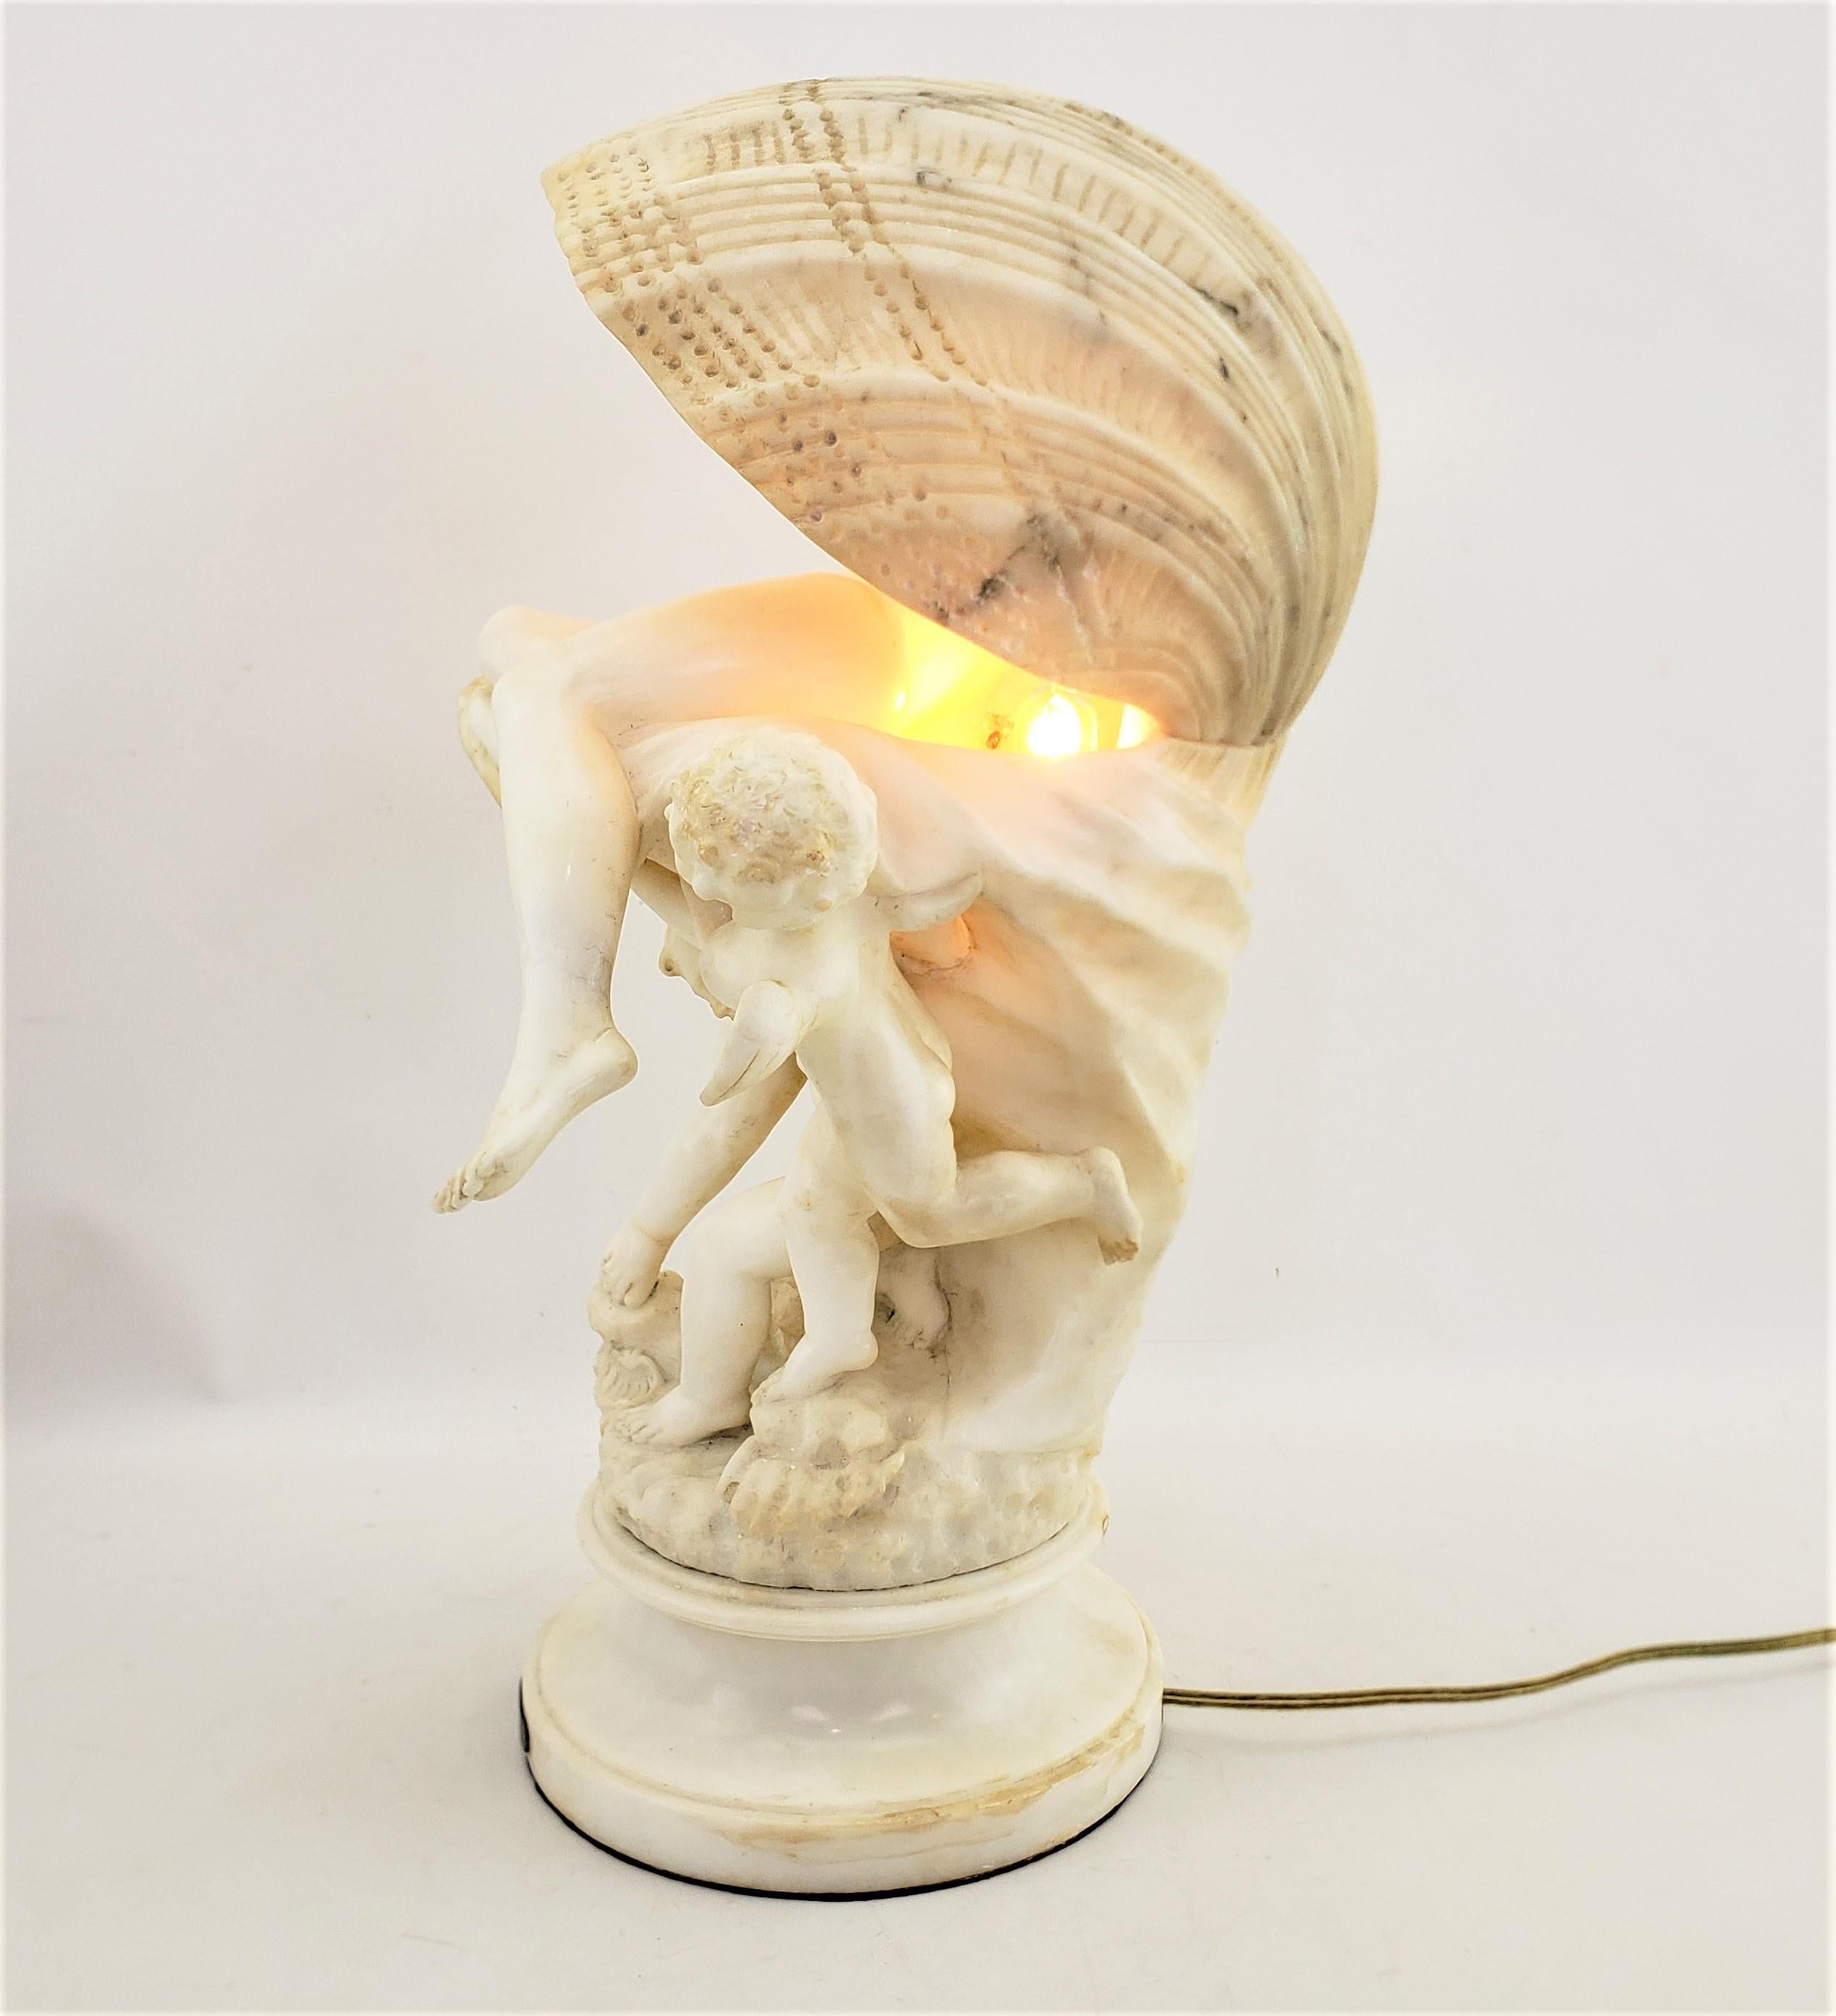 19th Century Large Umberto Stiaccini Carved Alabaster 'La Perla' Lighted Sculpture or Lamp For Sale